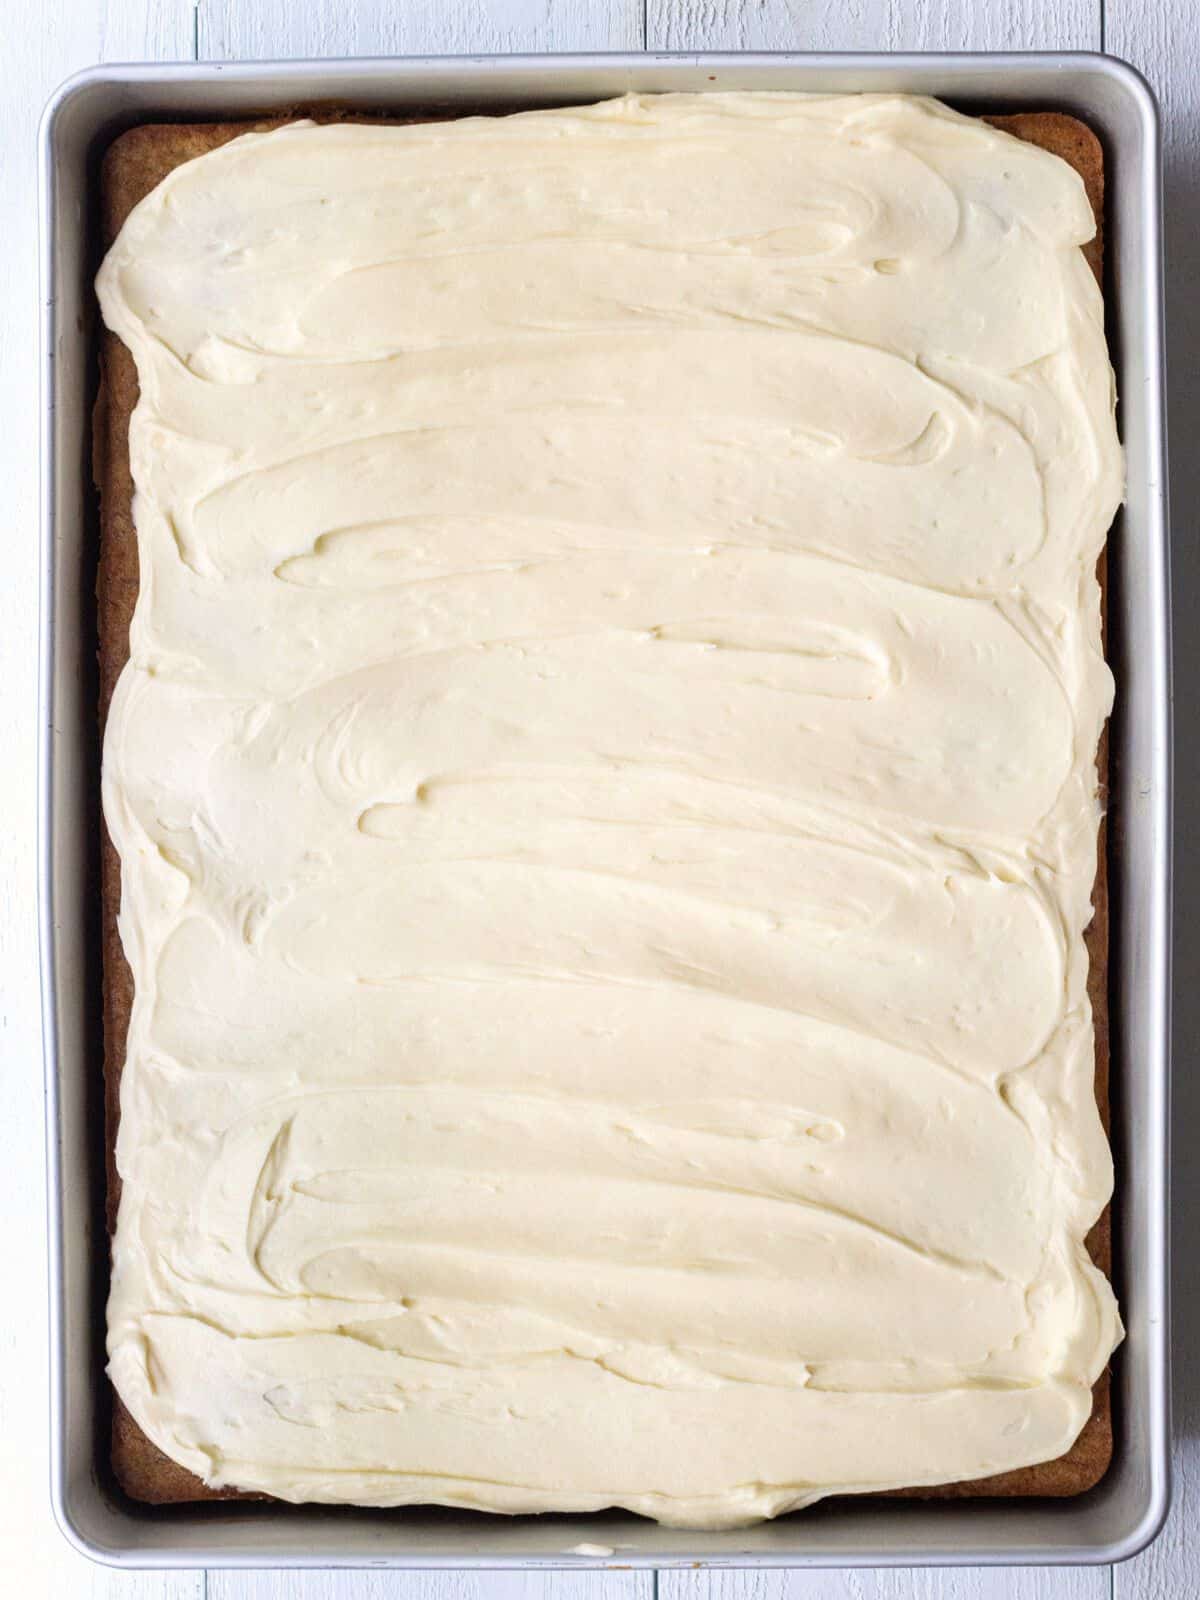 Banana cake topped with frosting in a baking dish.